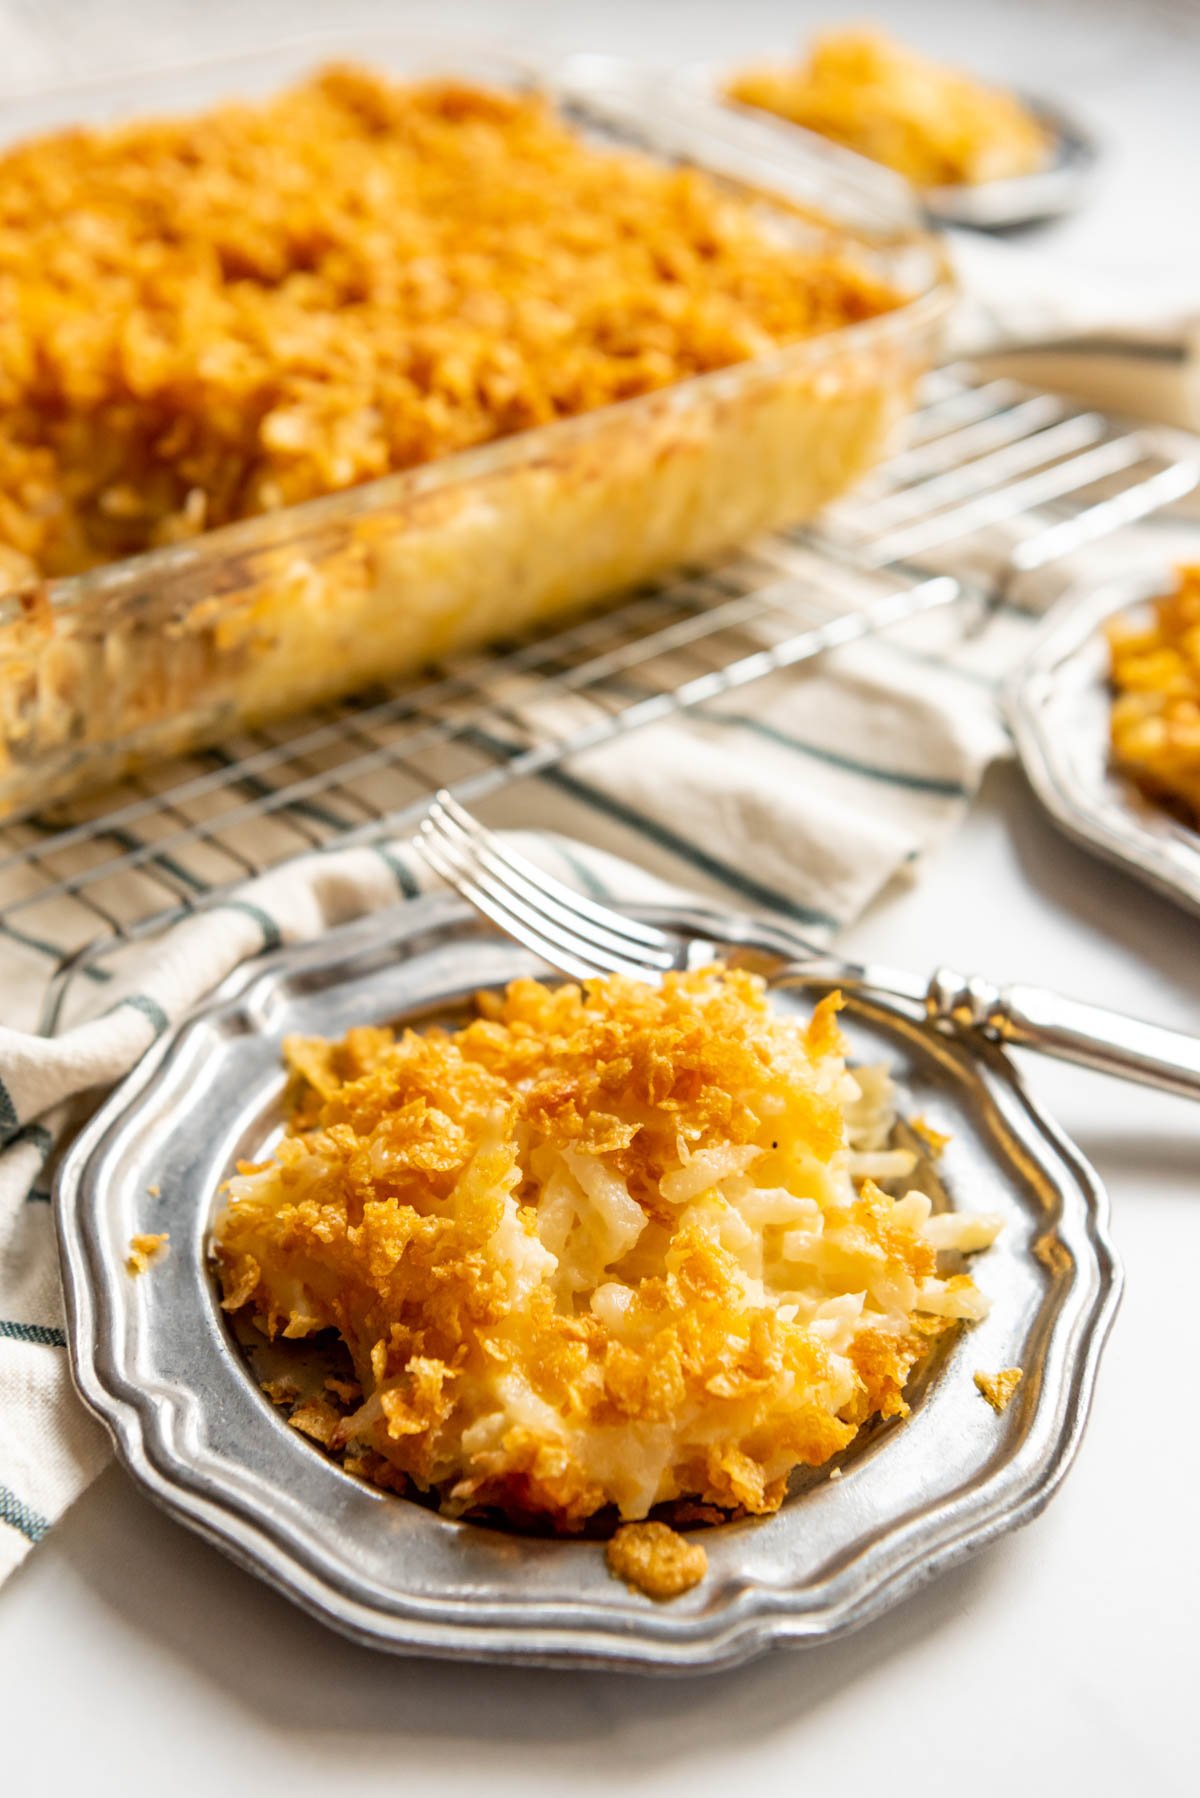 A scoop of funeral potatoes on a plate.